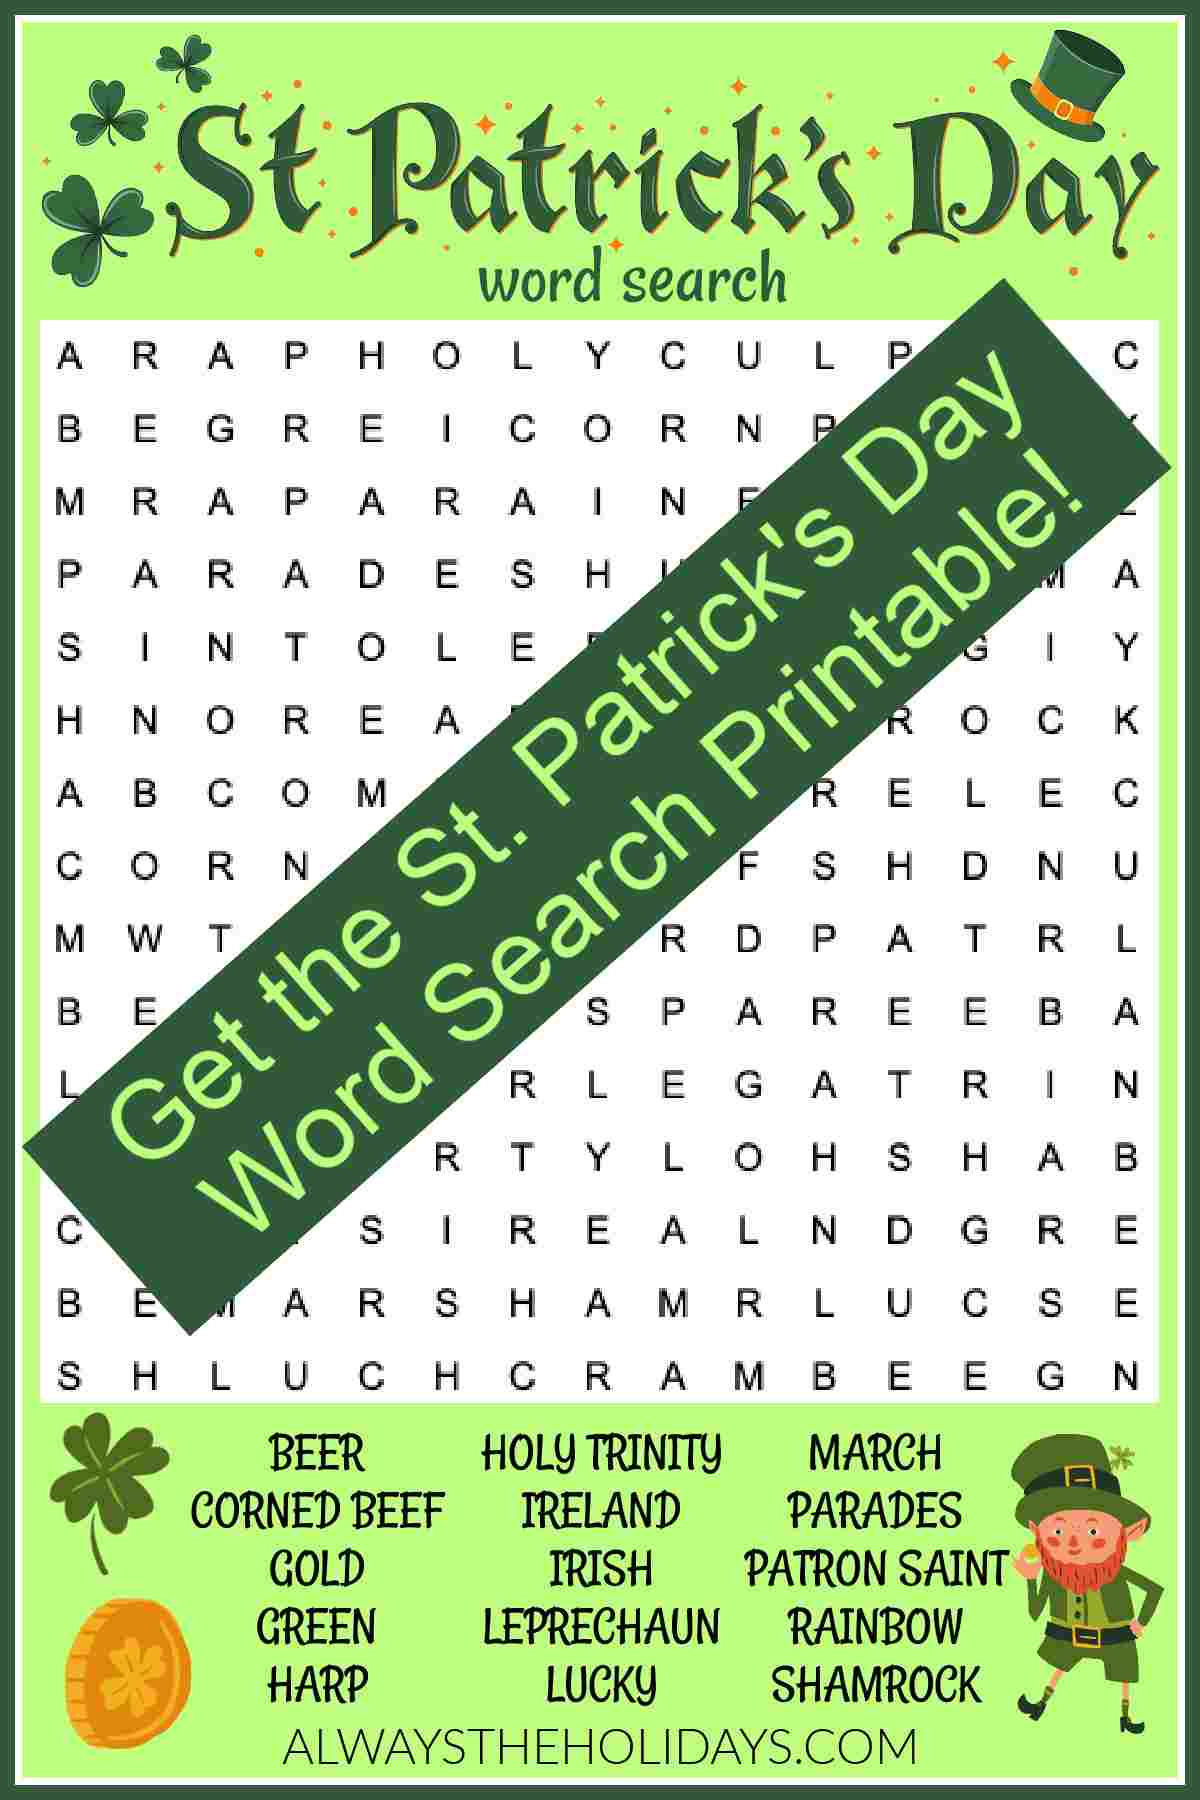 A free St. Patrick's word search with a word bank at the bottom and a dark green rectangle diagonally across the image with light green text that reads "Get the free St. Patrick's Day word search printable".